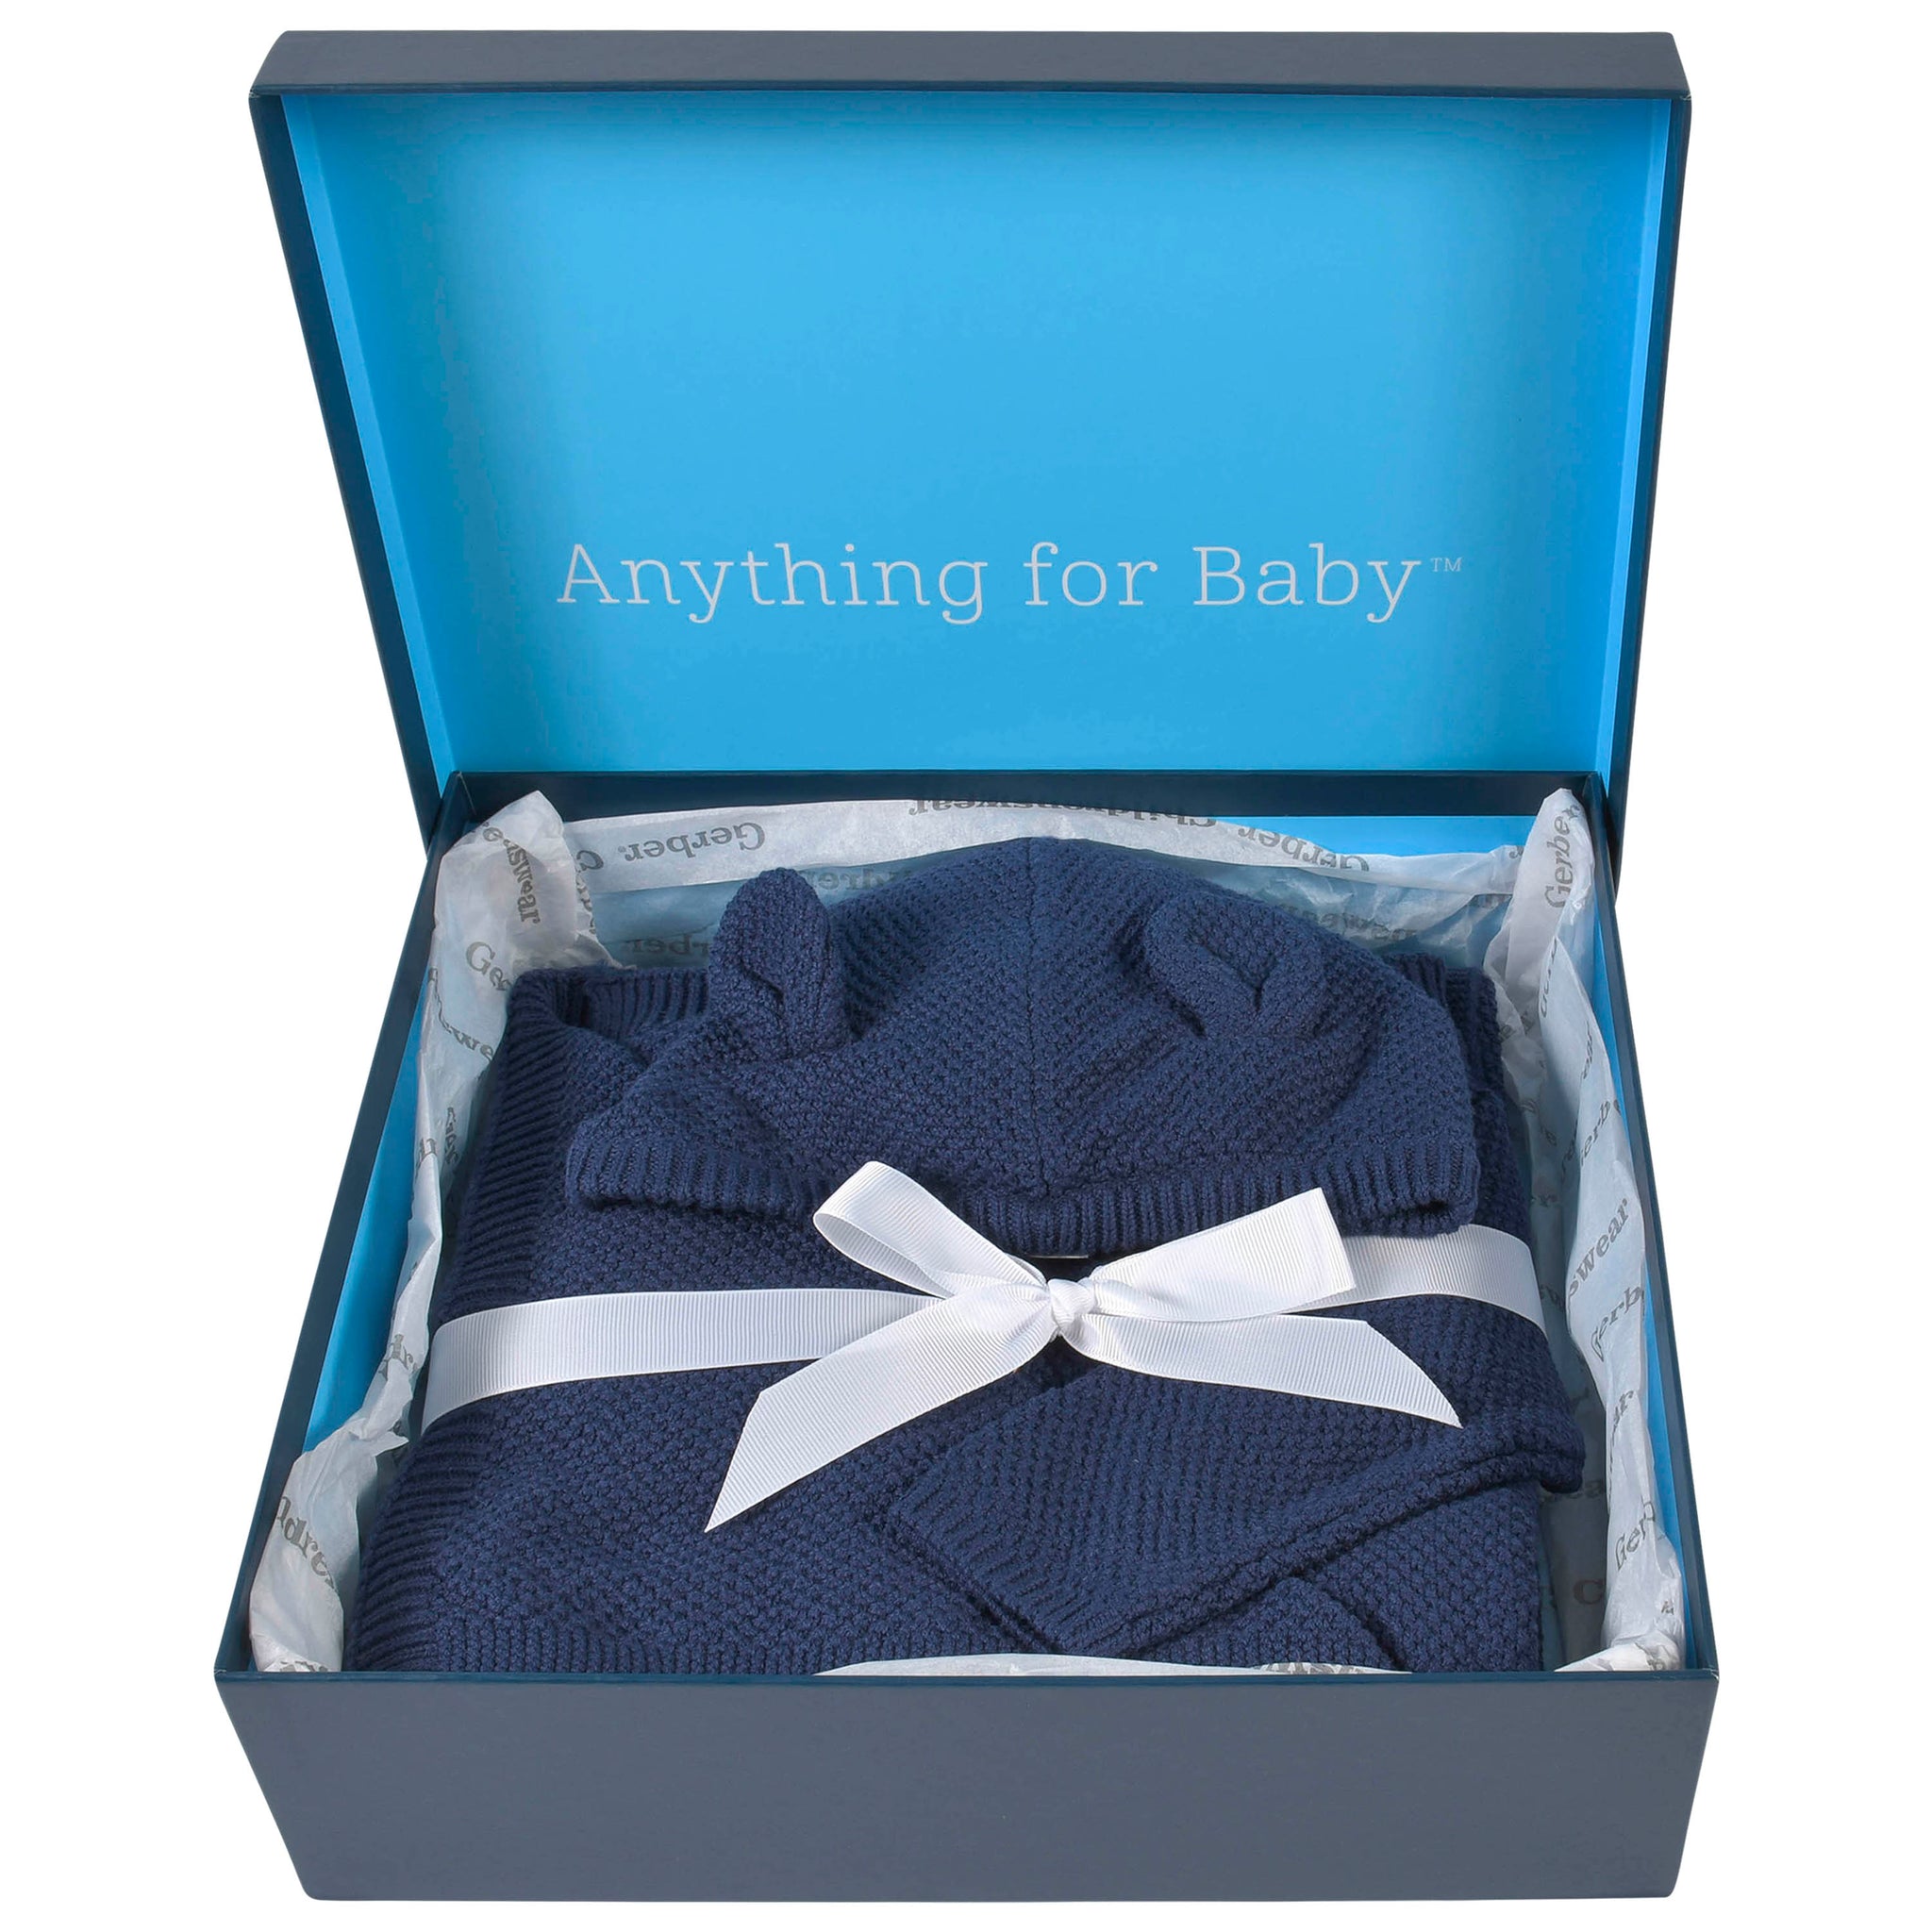 3-Piece Baby Boys Navy Knit Outfit & Blanket Set-Gerber Childrenswear Wholesale